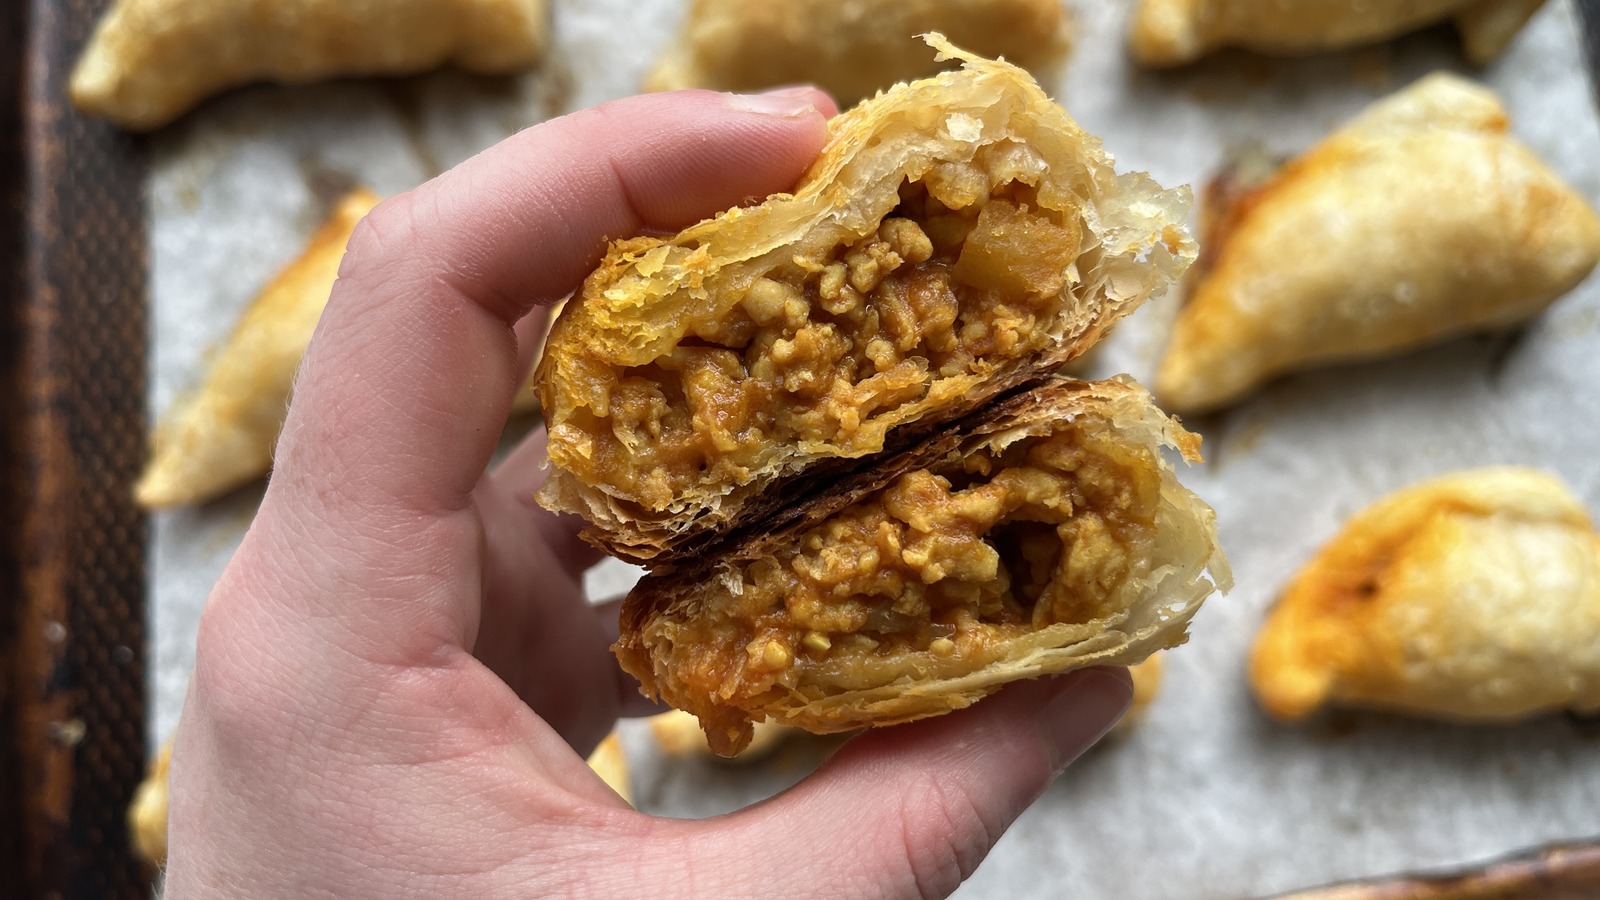 https://www.tastingtable.com/img/gallery/baked-malaysian-style-curry-puff-recipe/l-intro-1693322870.jpg